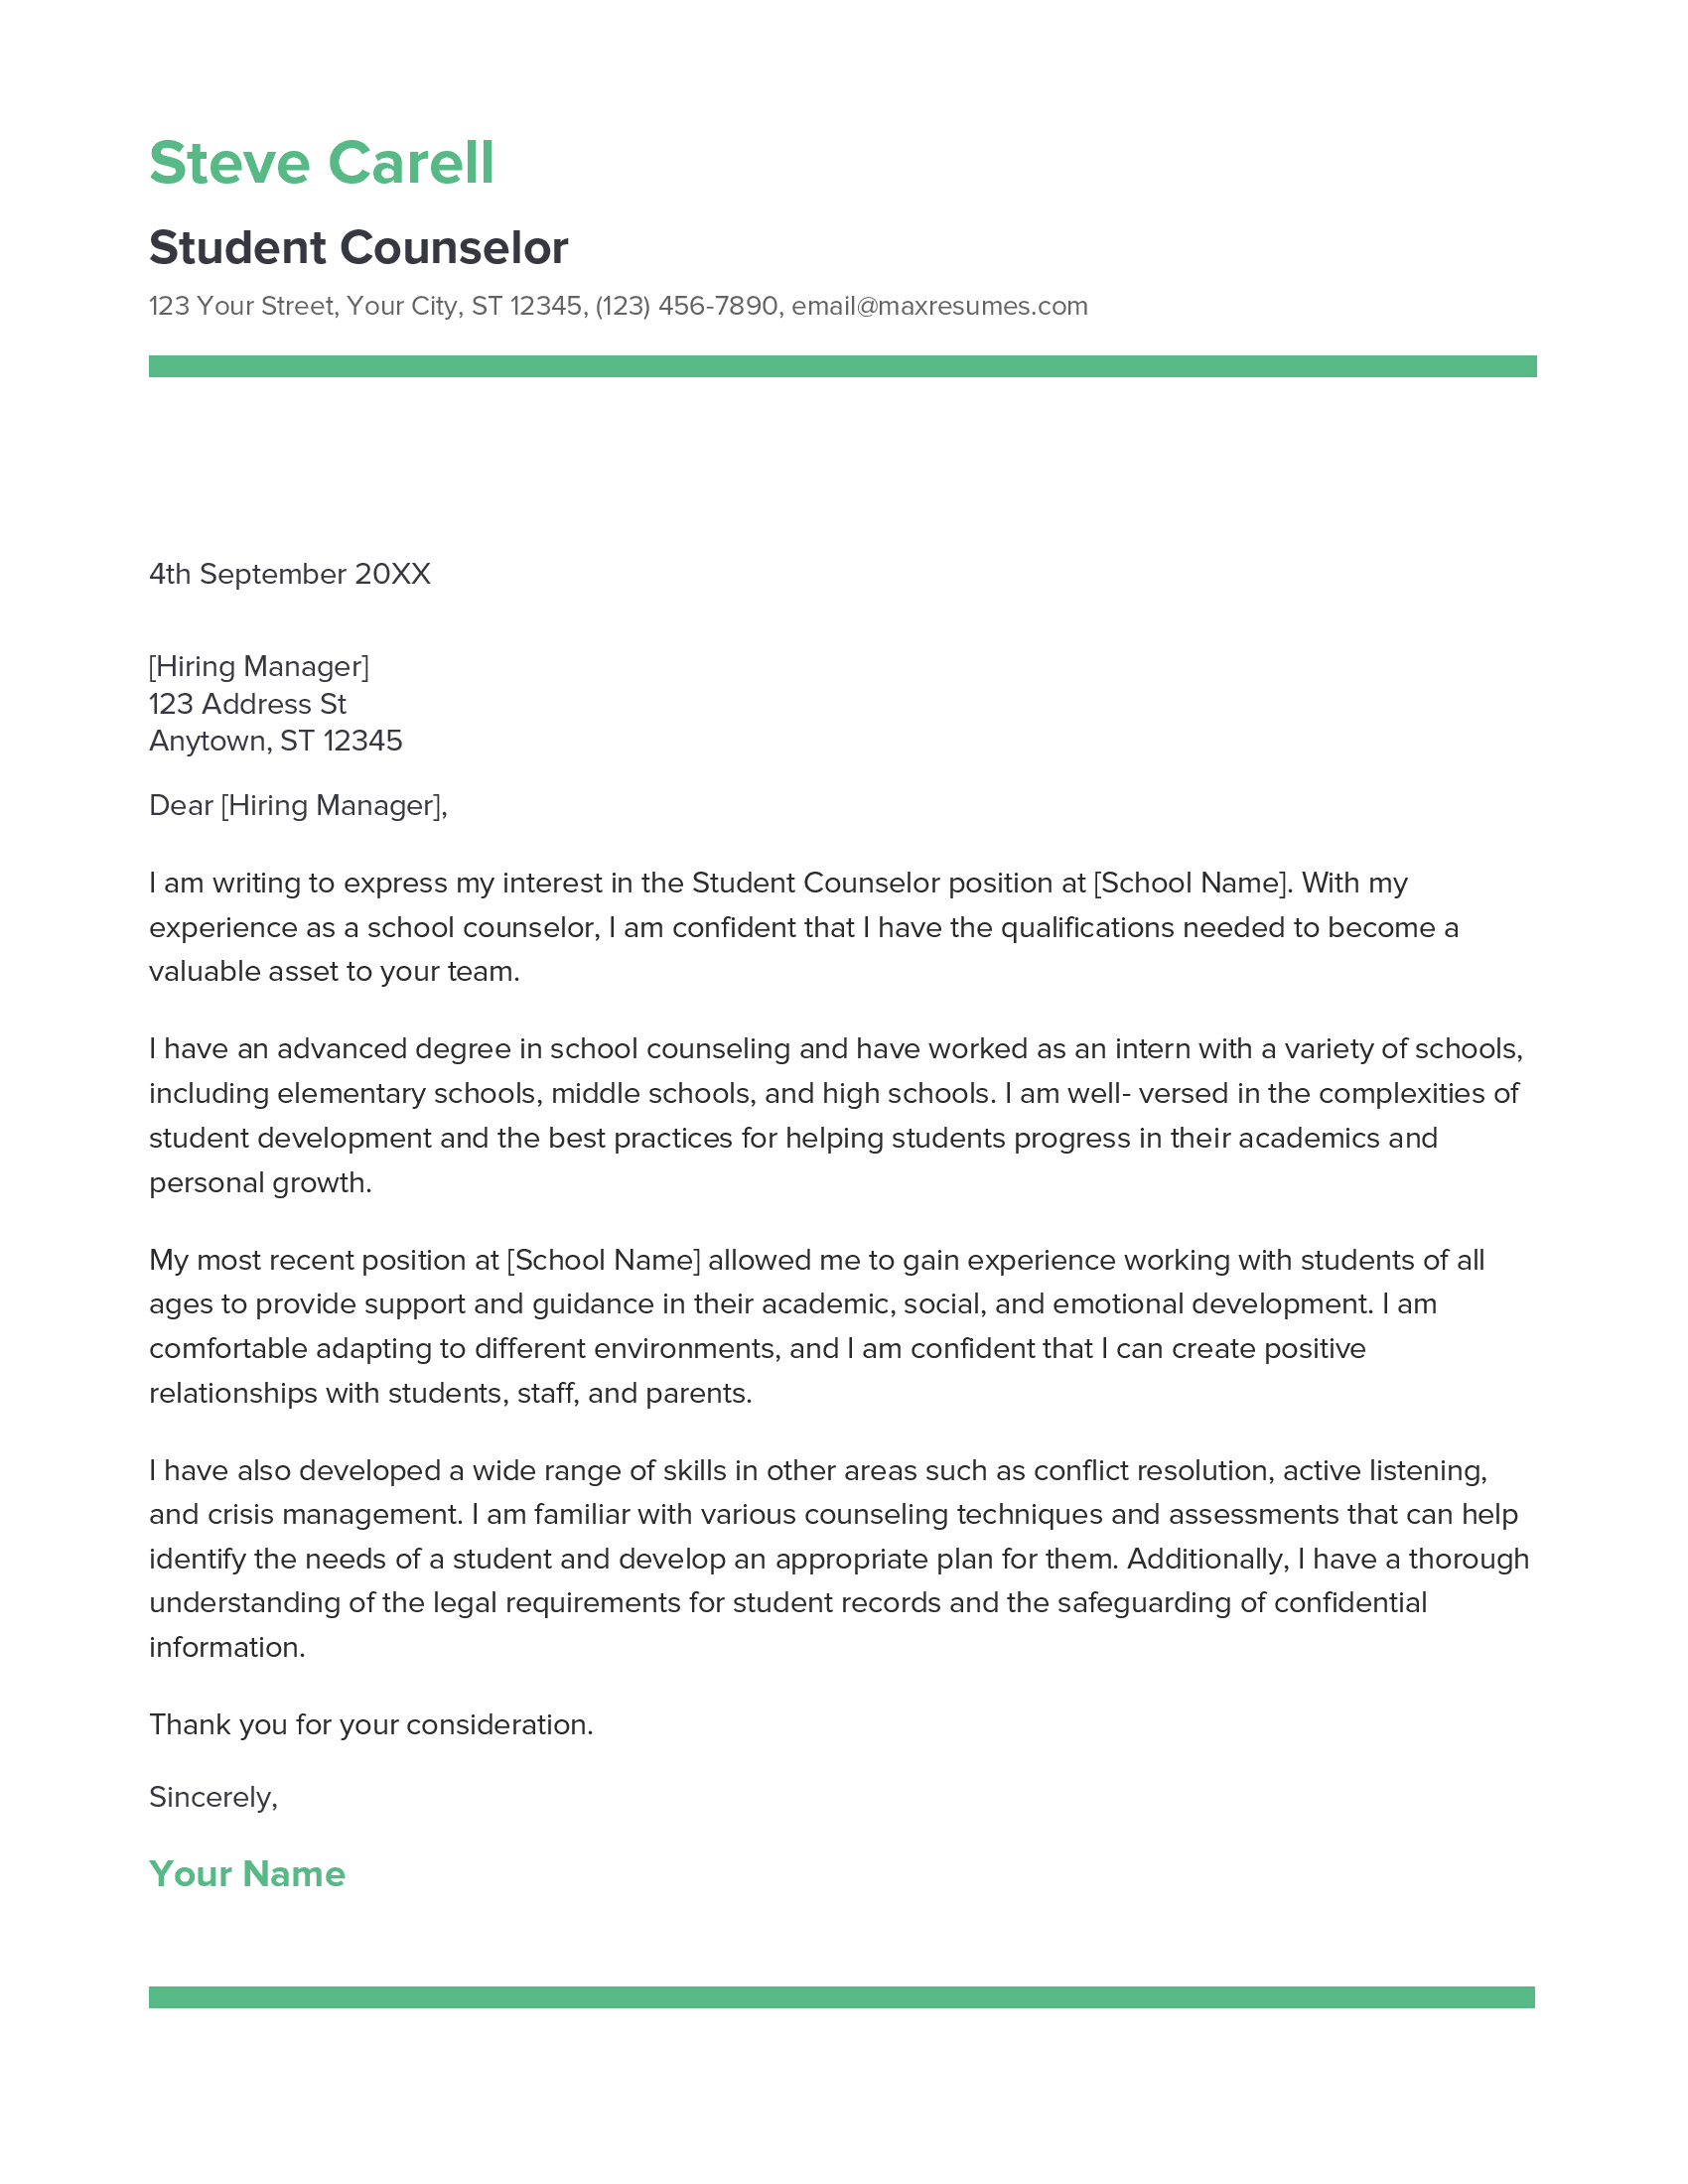 Student Counselor Cover Letter Example